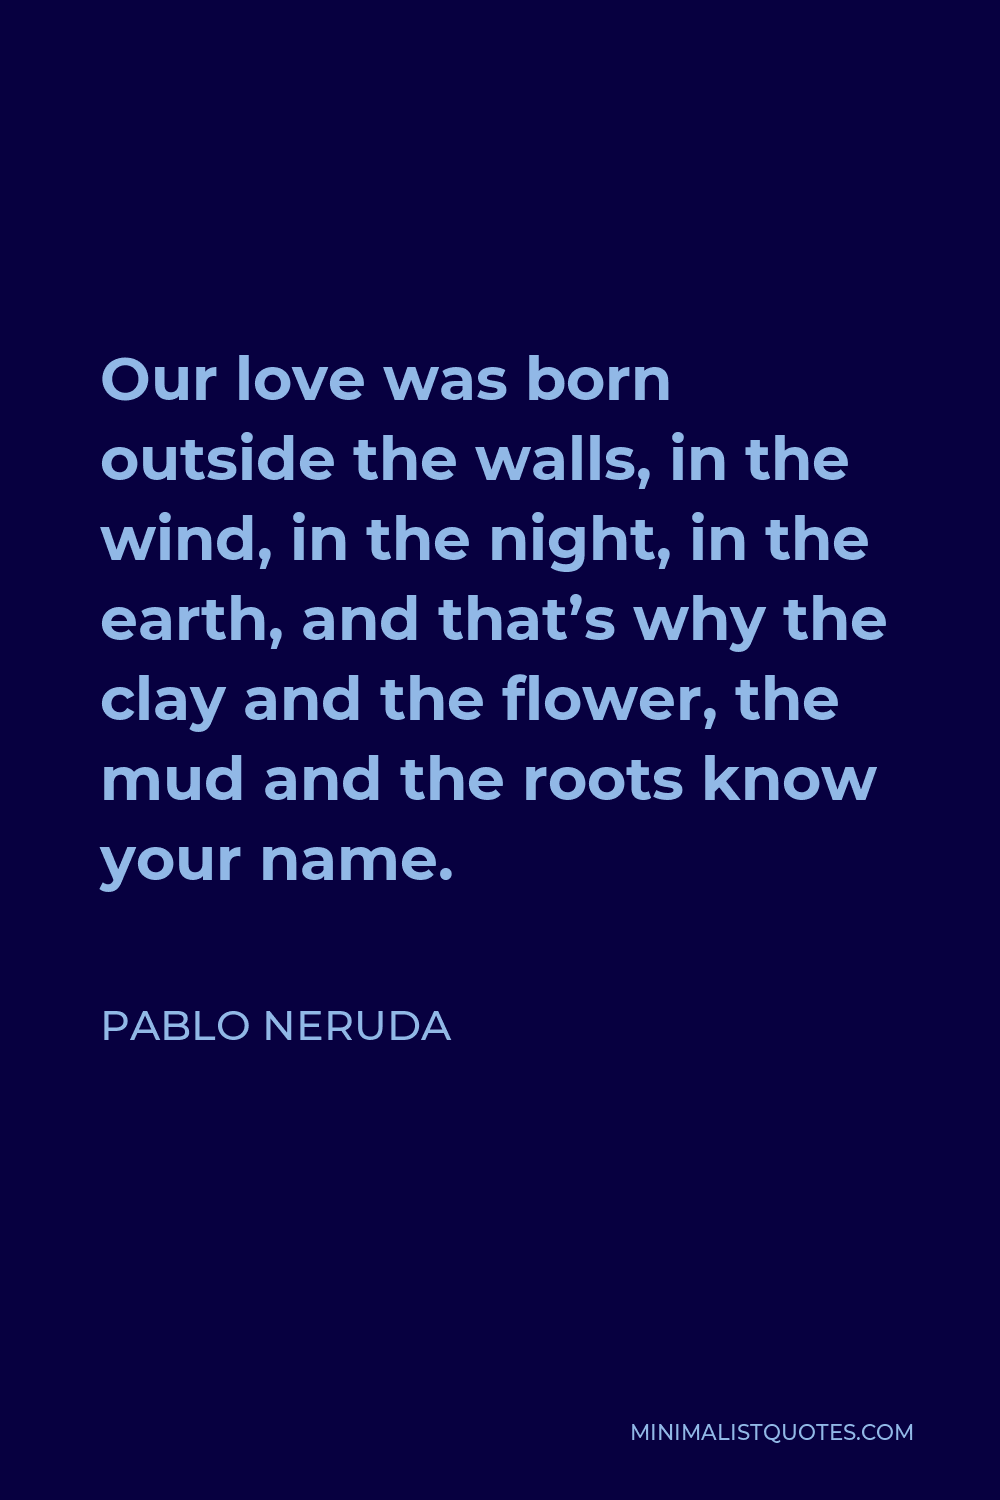 Pablo Neruda Quote - Our love was born outside the walls, in the wind, in the night, in the earth, and that’s why the clay and the flower, the mud and the roots know your name.